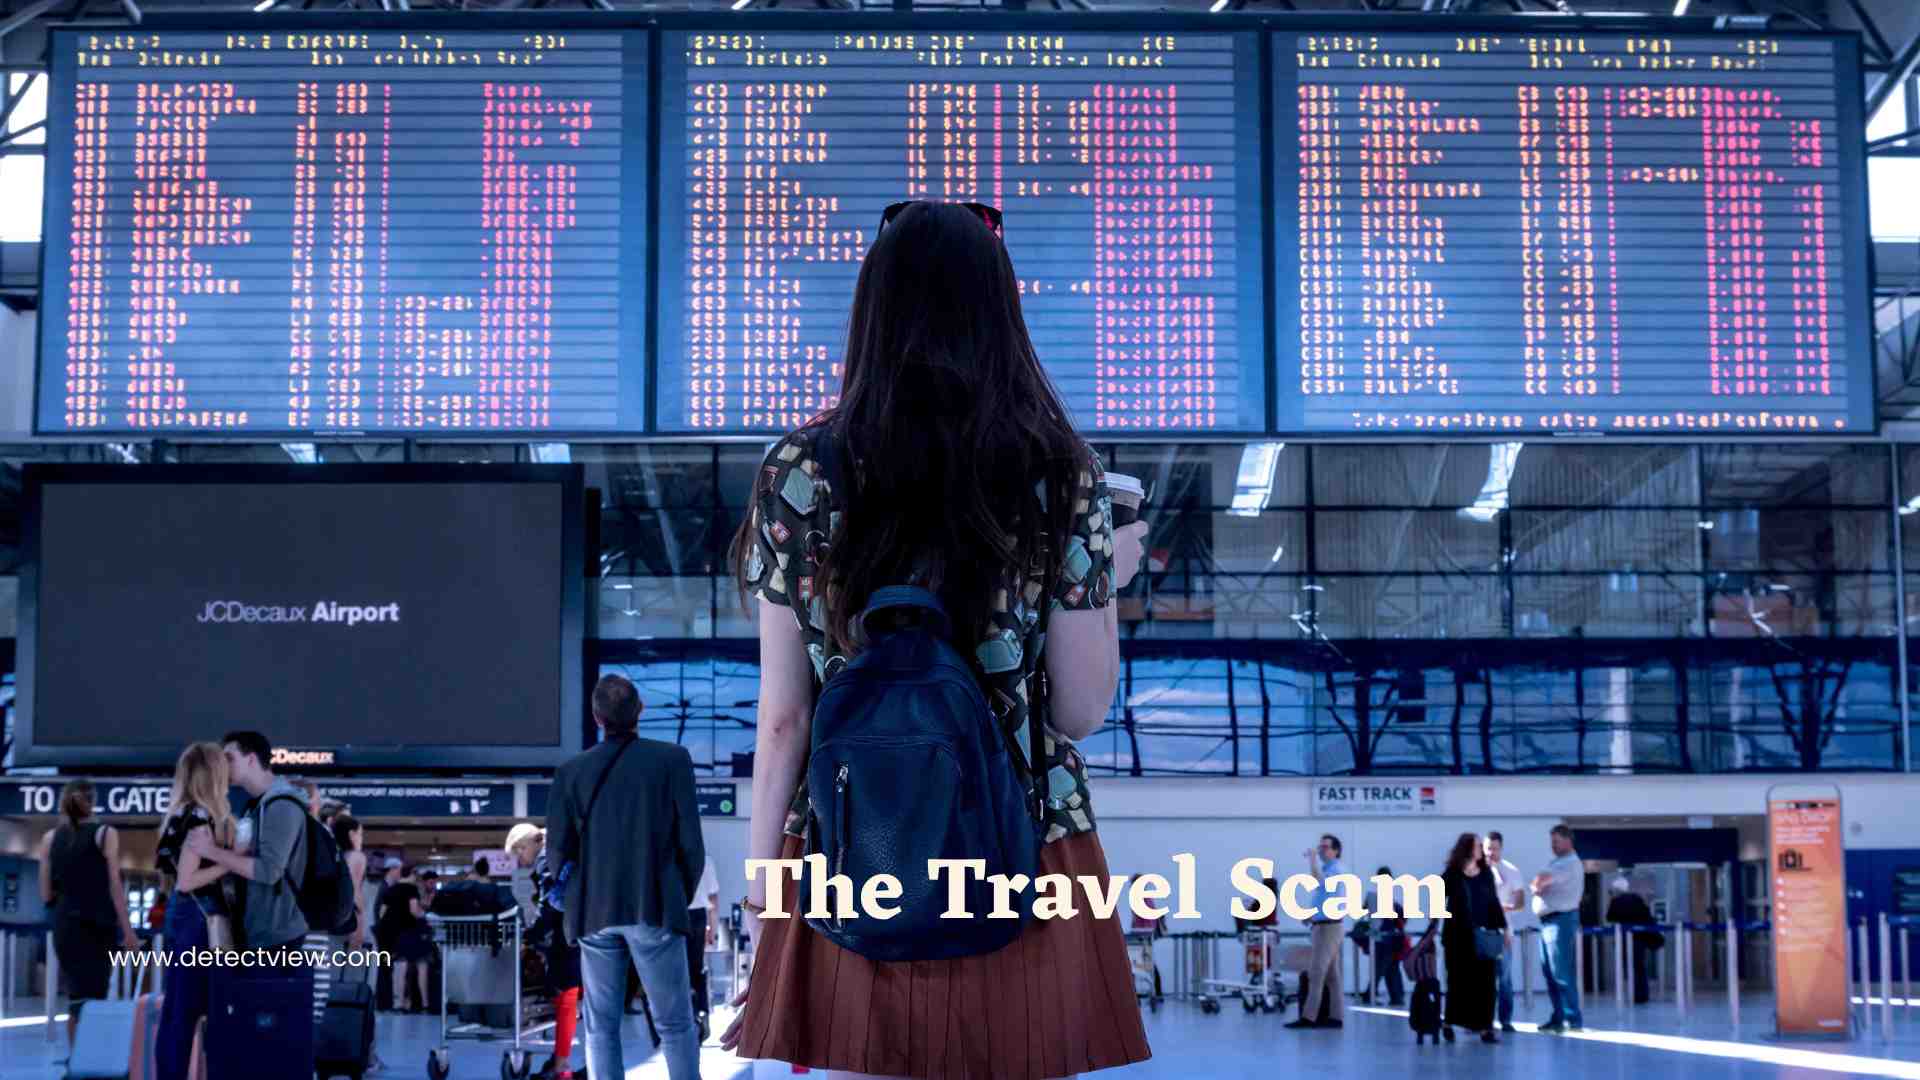 The Travel Scam